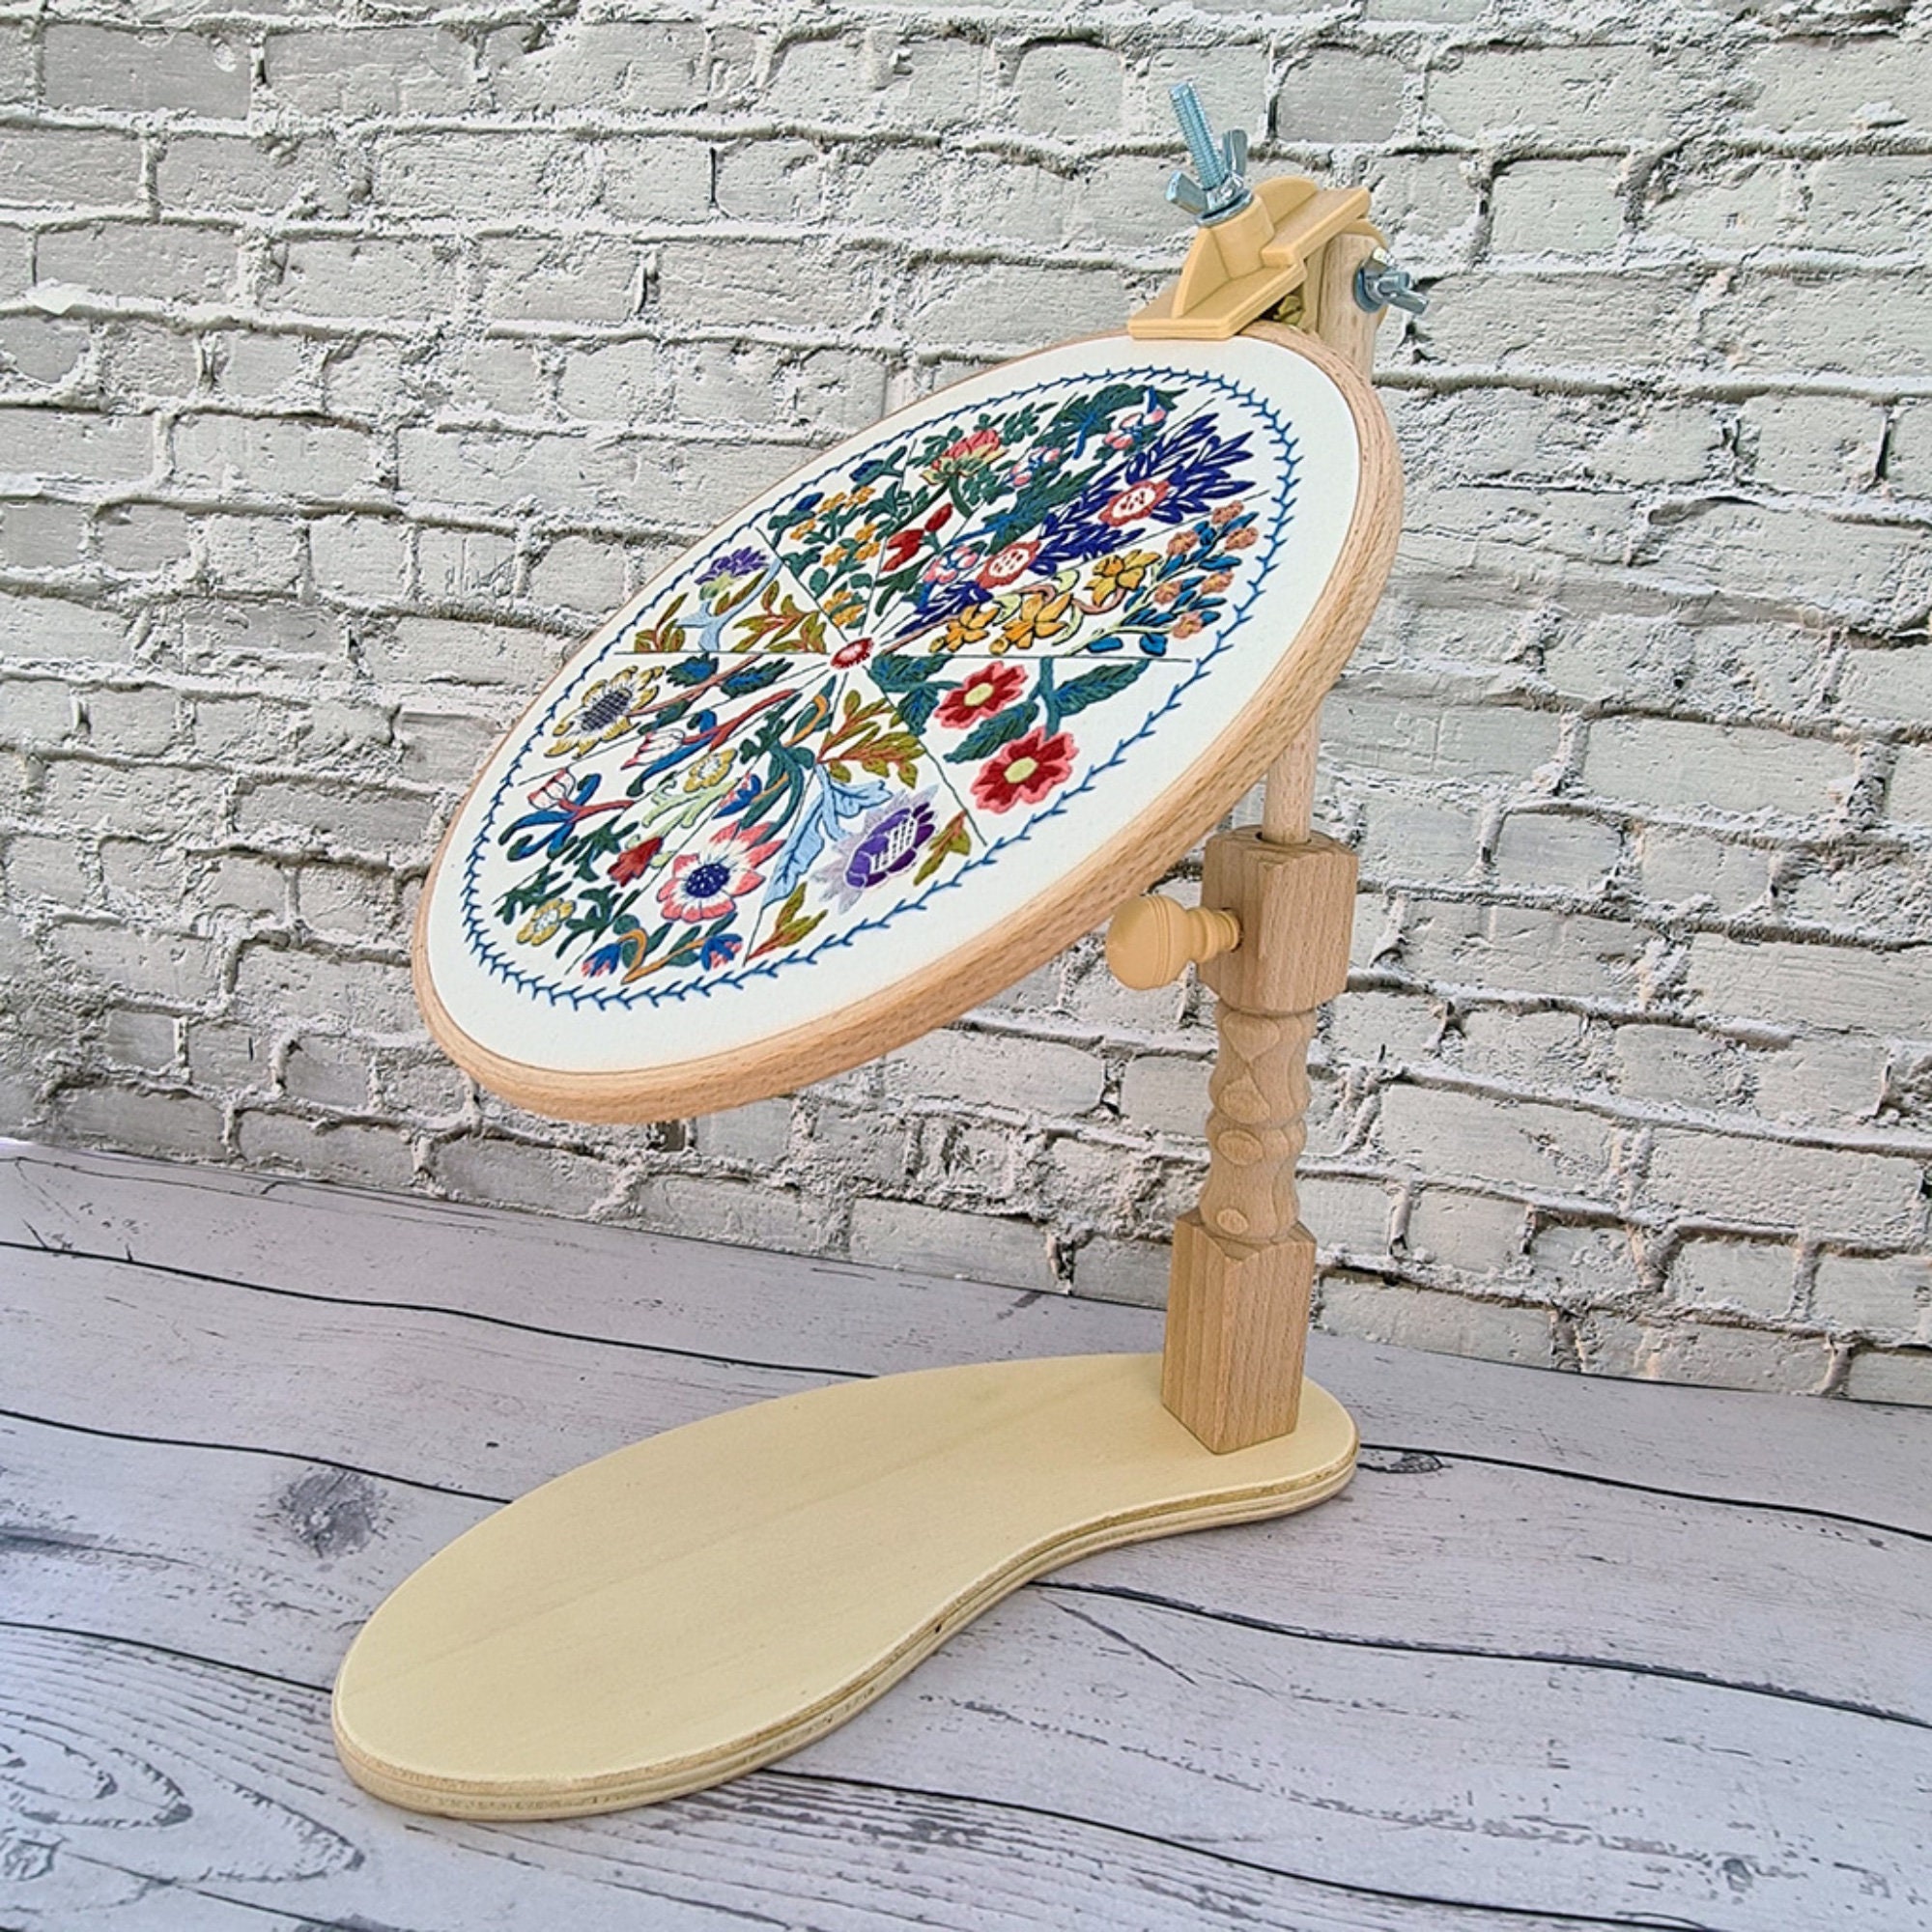 Beech Wood Adjustable Rotated Embroidery Hoop Stand India